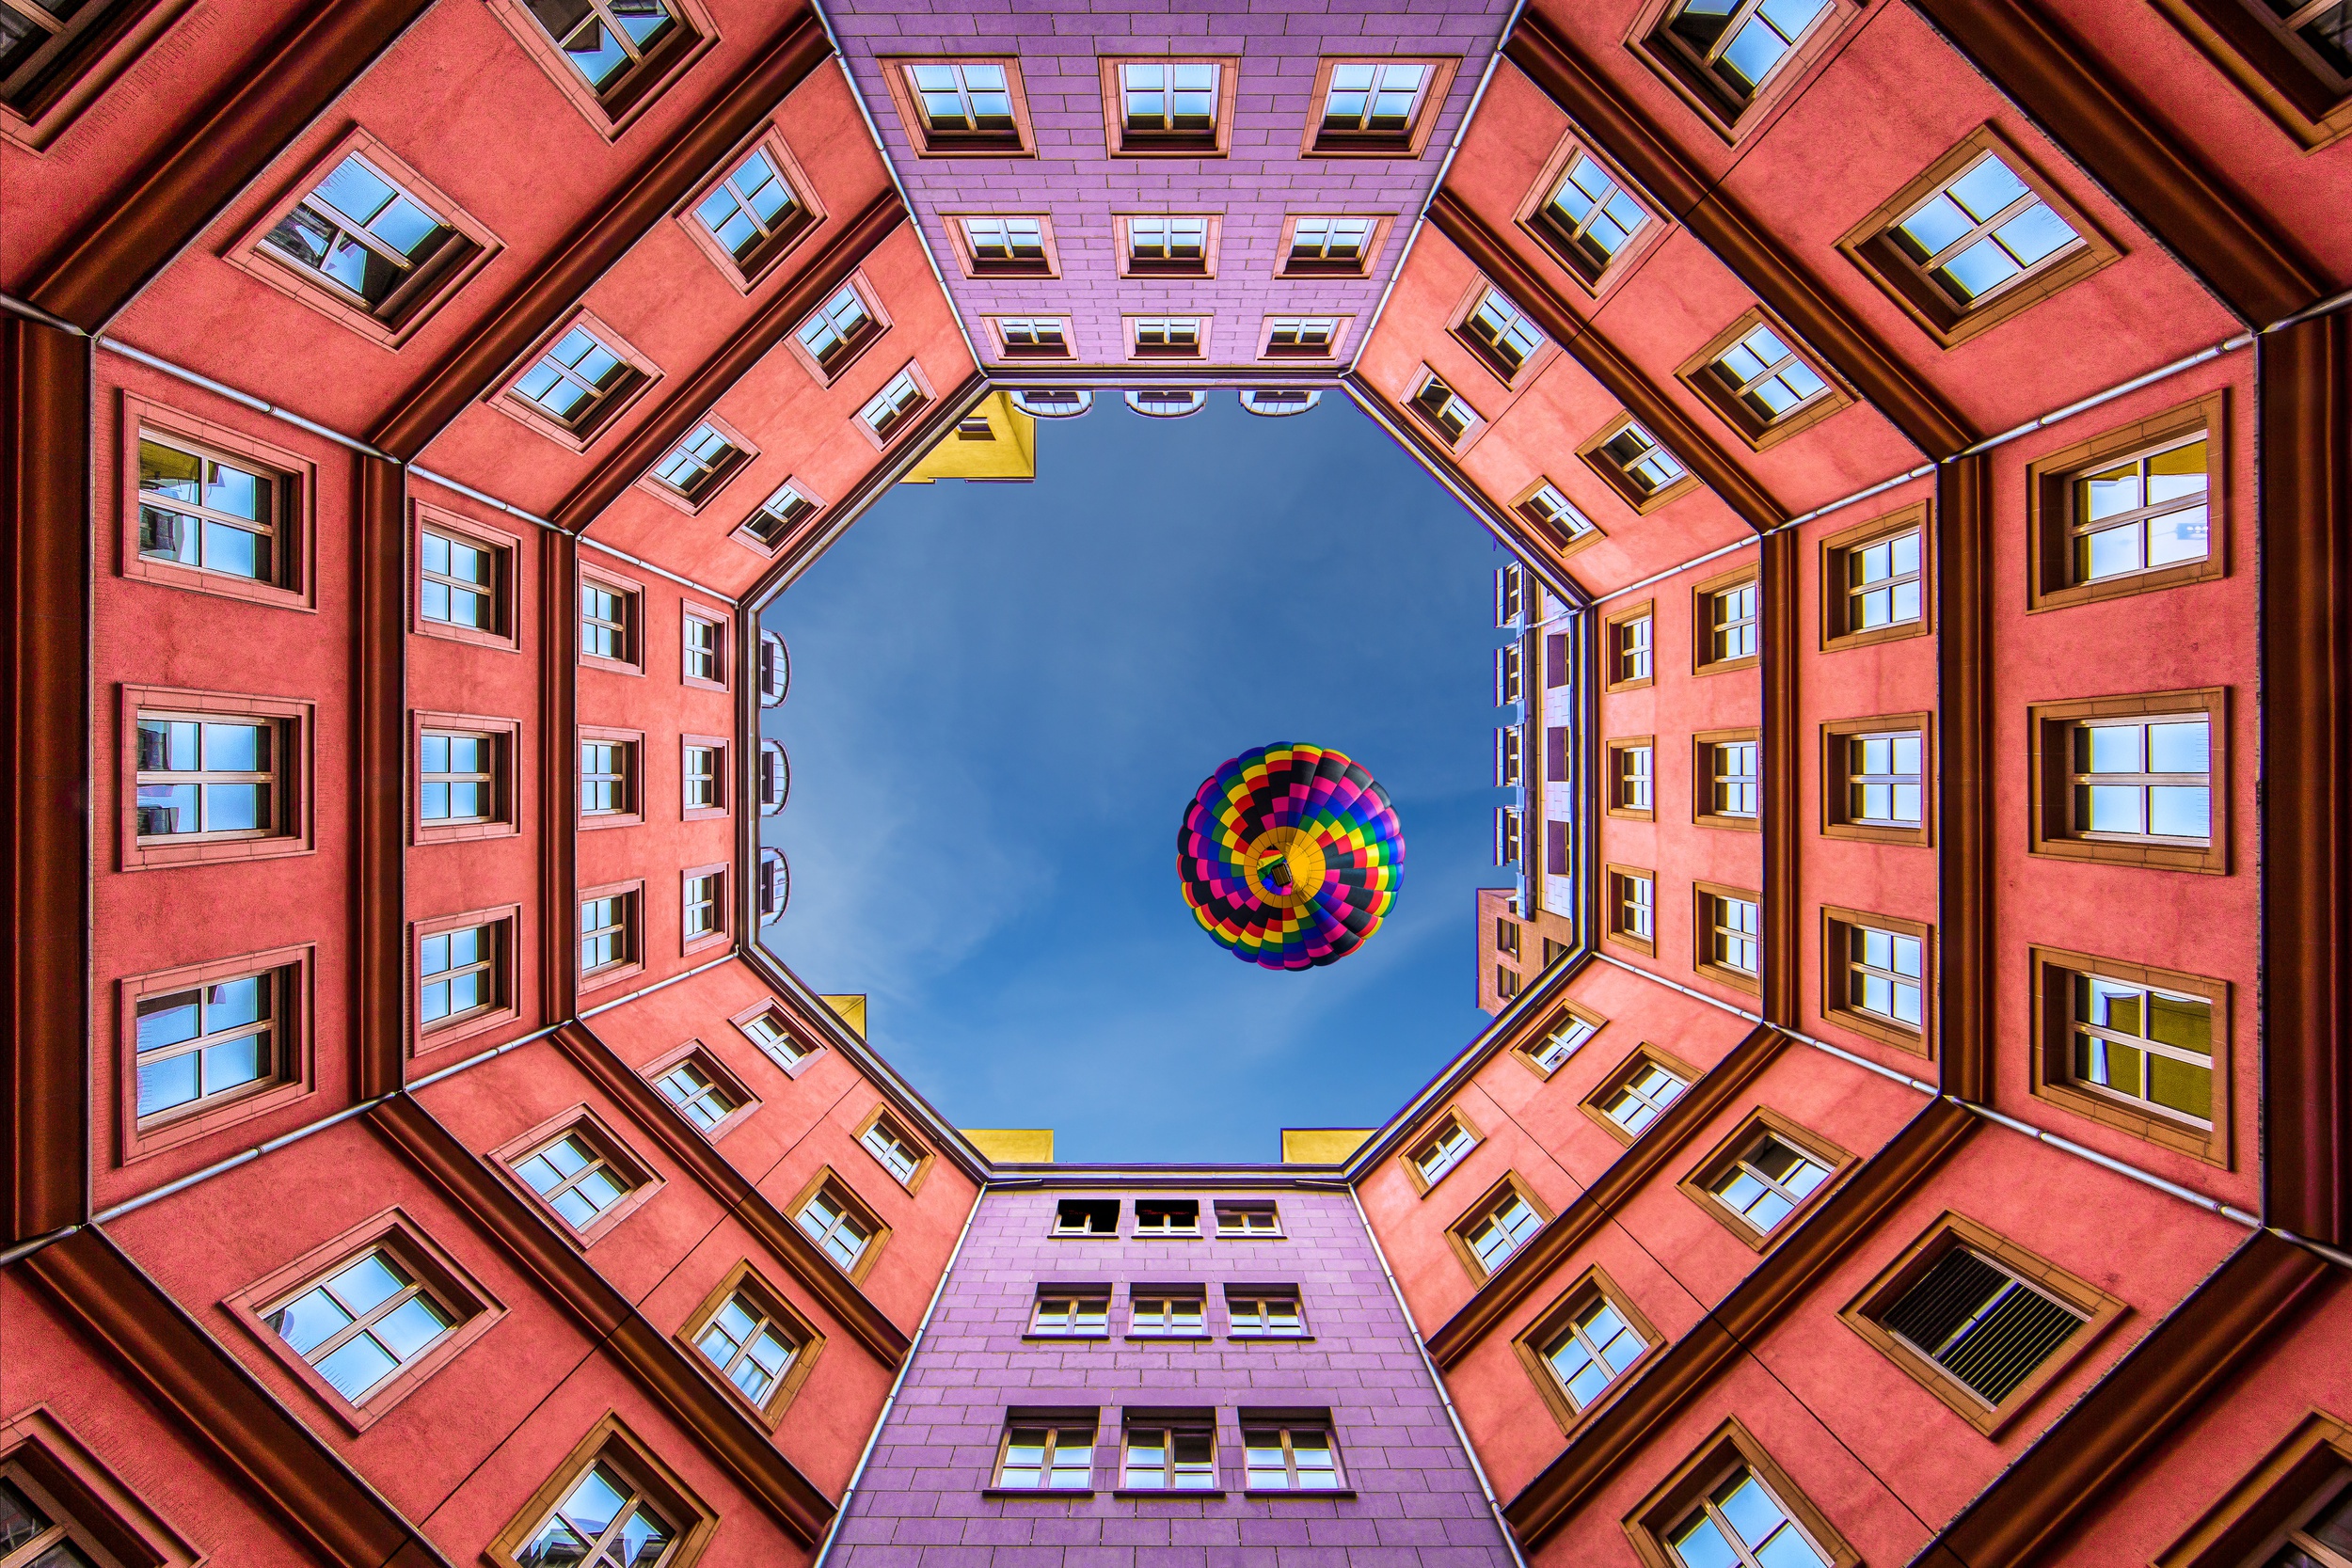 General 2500x1667 hot air balloons building colorful bottom view